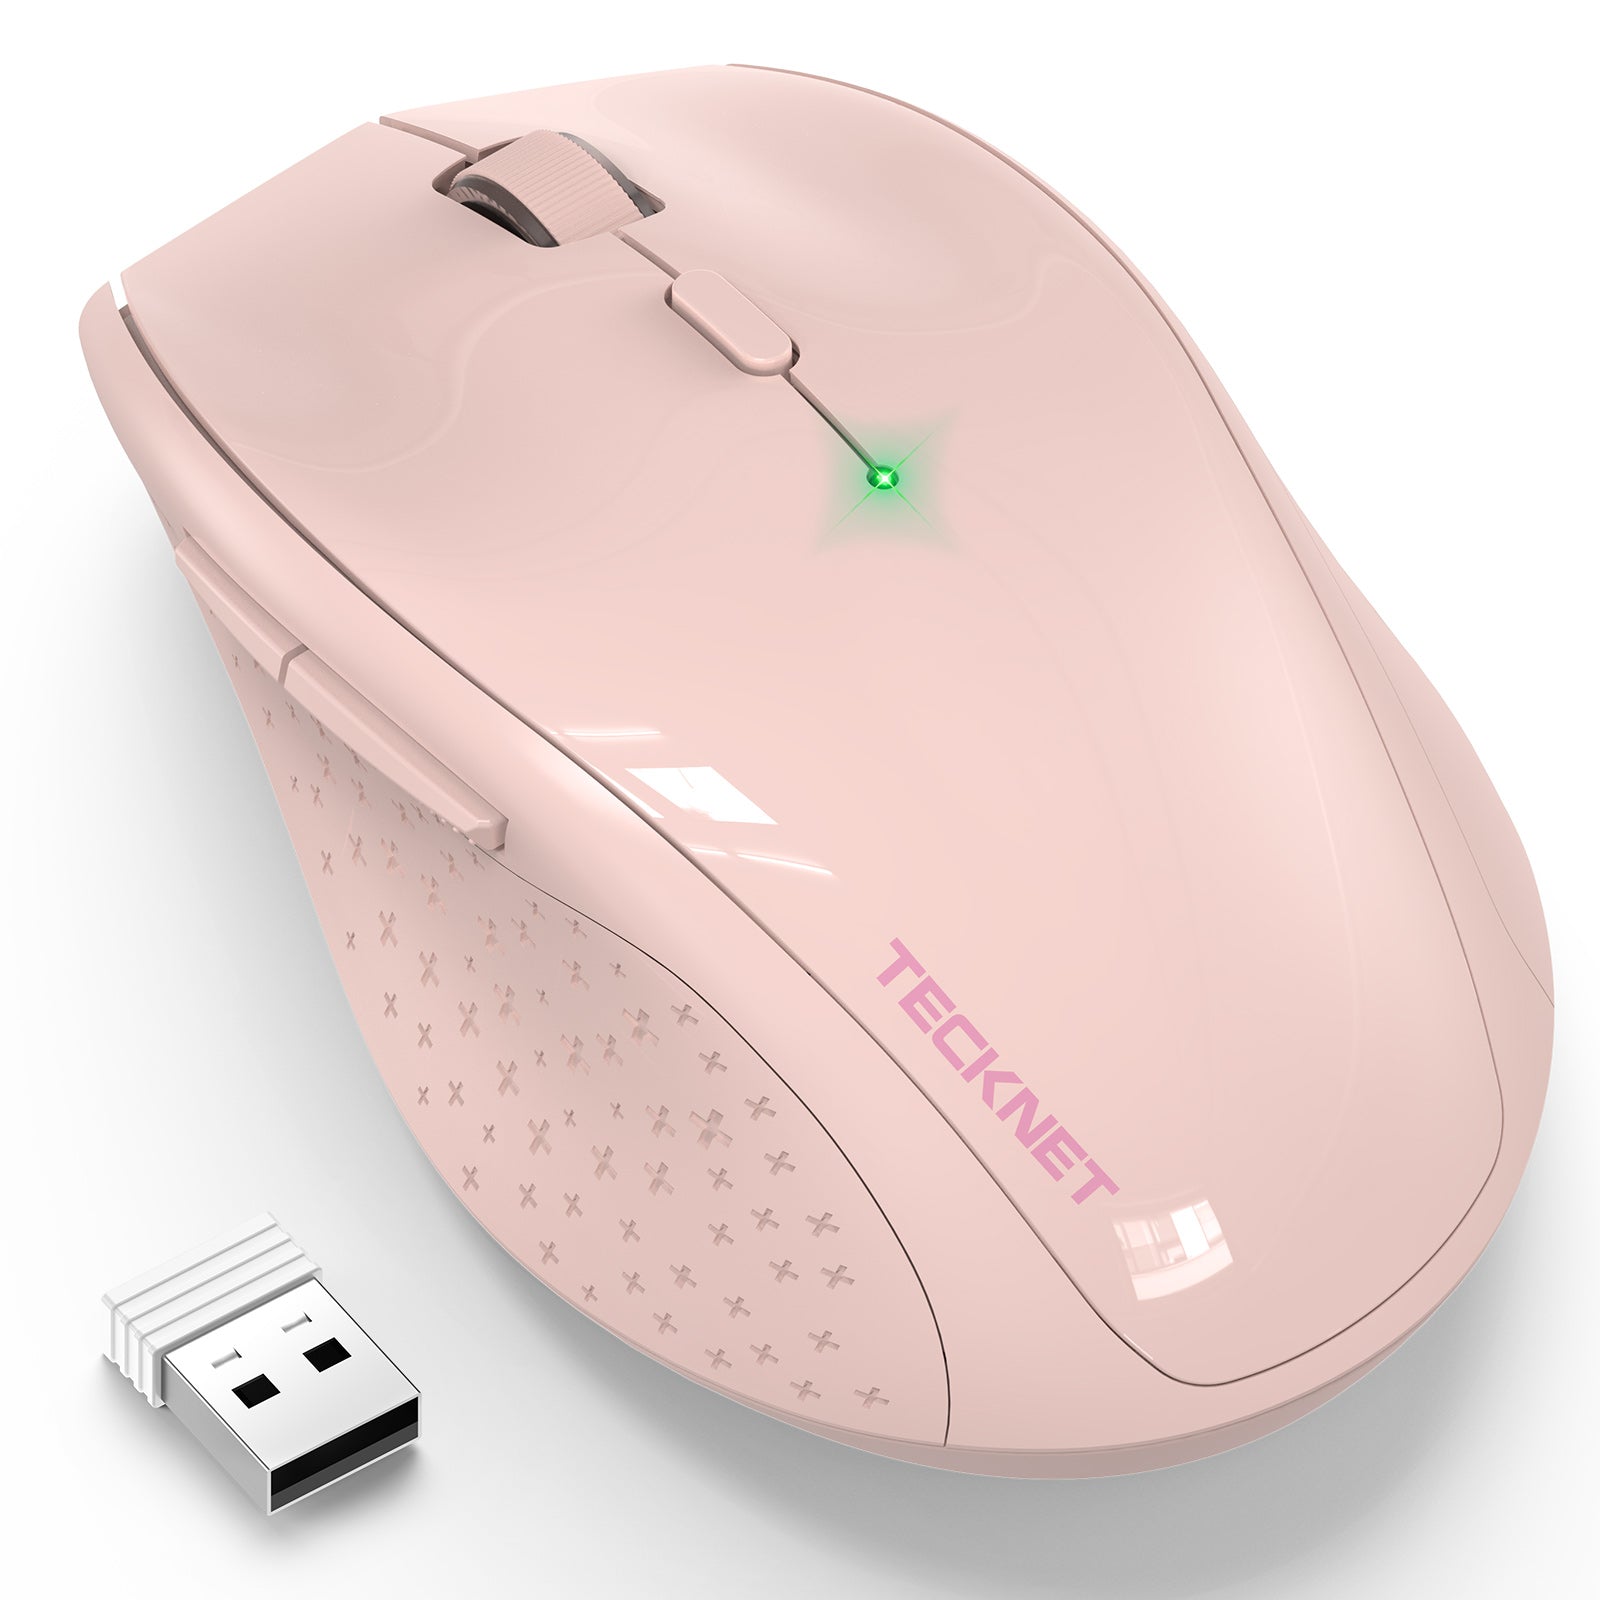 TECKNET Classic 2.4G Wireless Mouse, 3200 DPI Optical Computer Mice with 6 Adjustable Levels